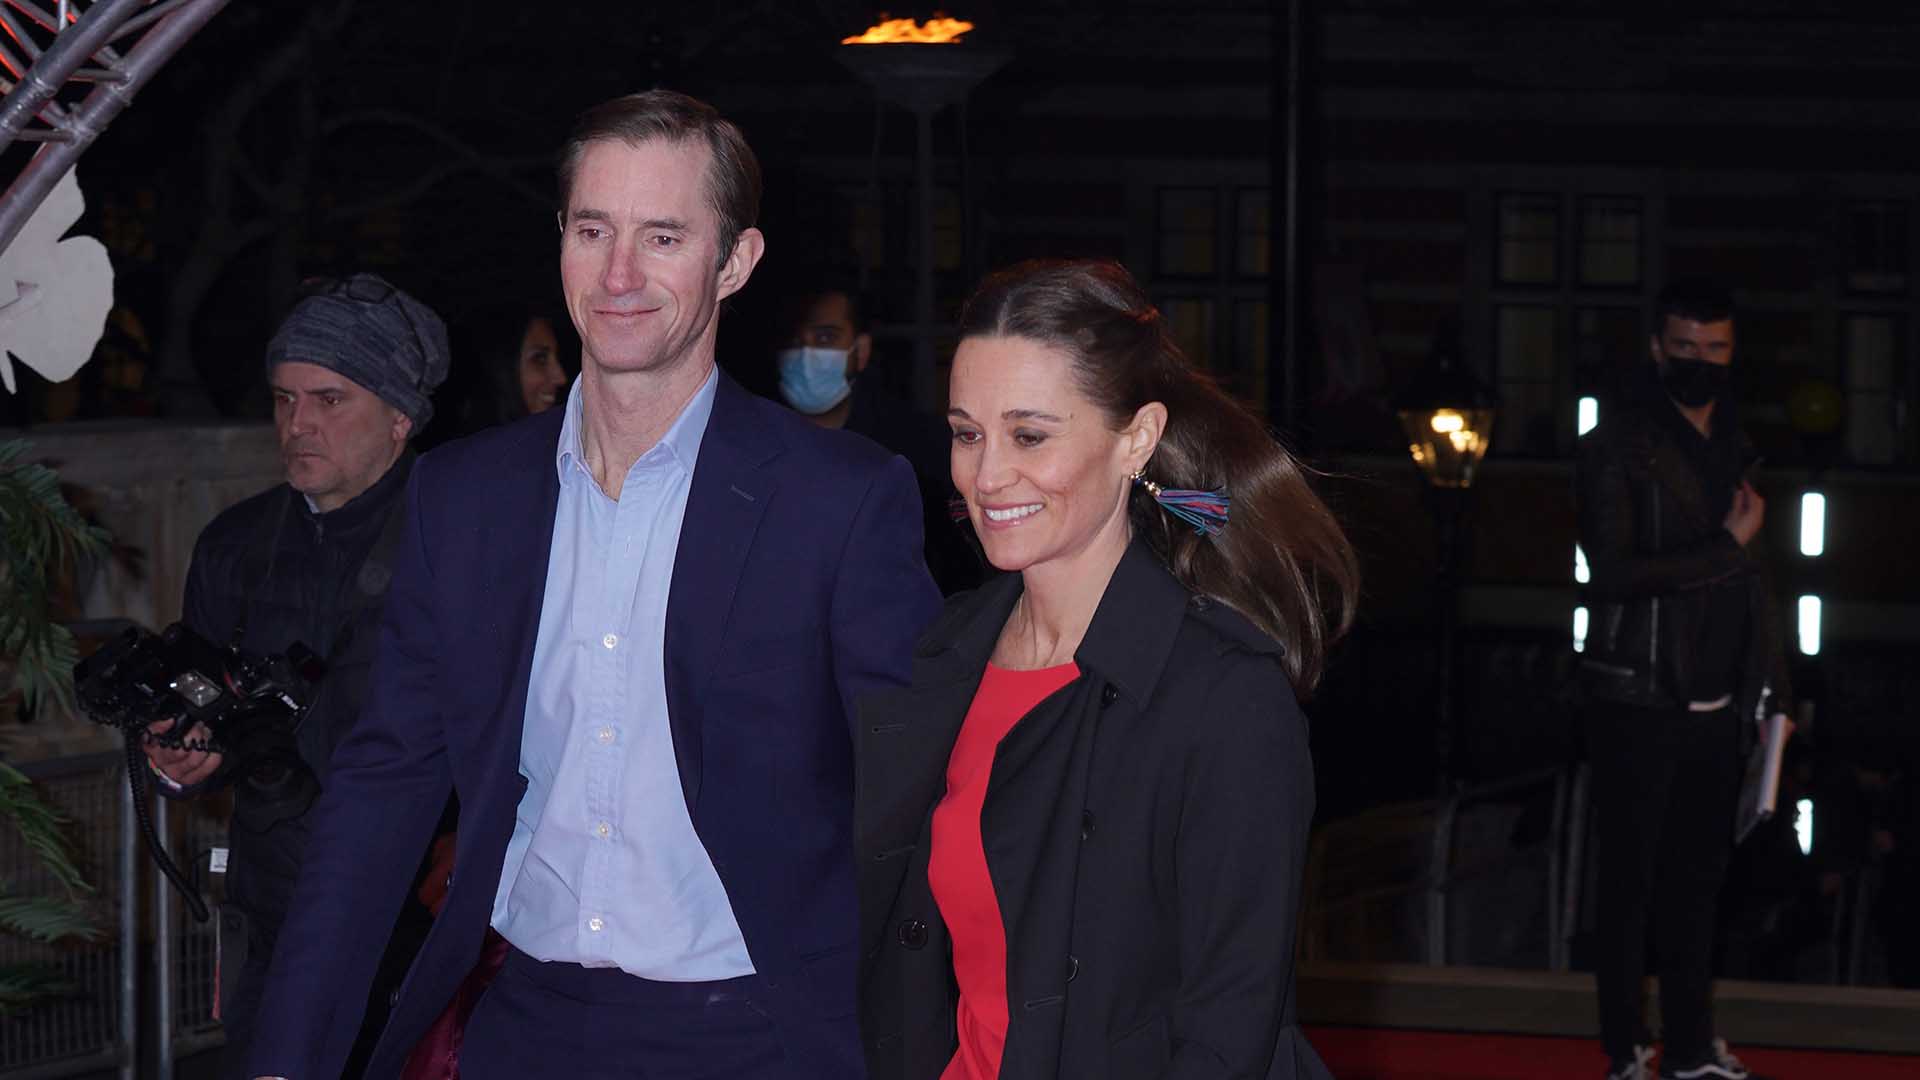 Pippa Middleton and James Matthews attending the premiere of Cirque Du Soleil's Luzia in London. Picture date: Thursday January 13, 2022.